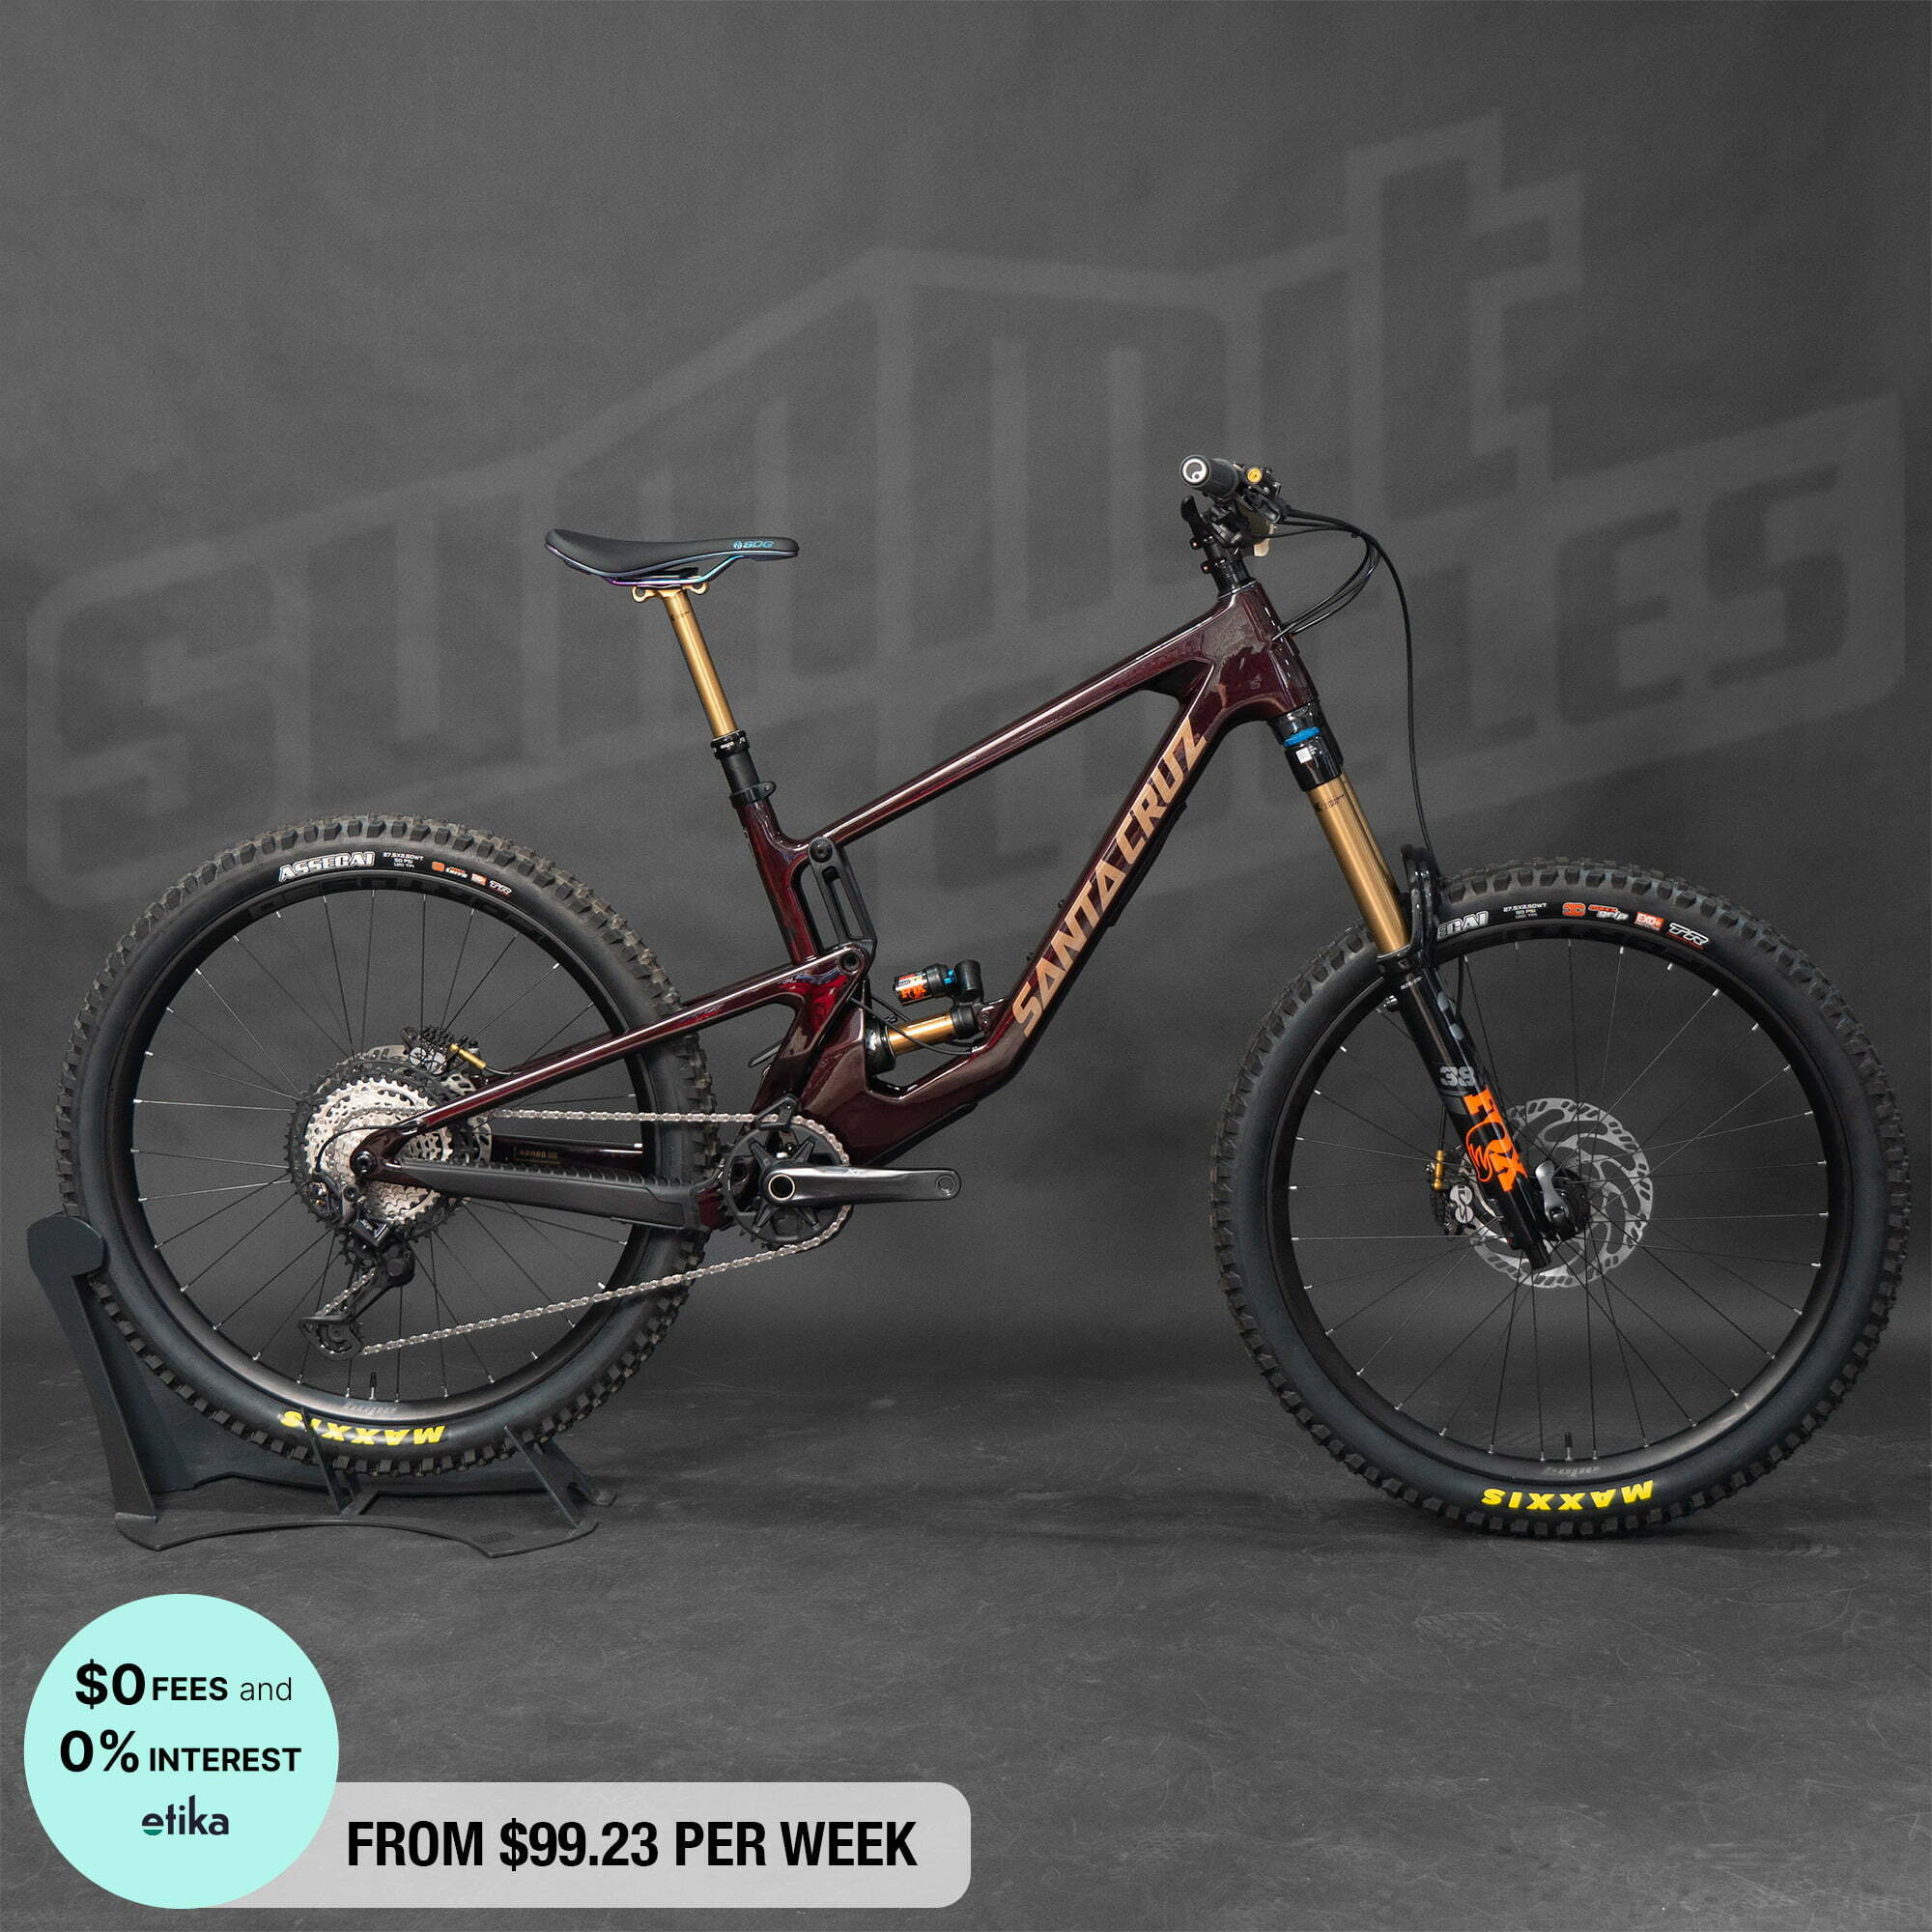 Santa Cruz Nomad Review Is The All-New Enduro Beast Any Good? | lupon ...